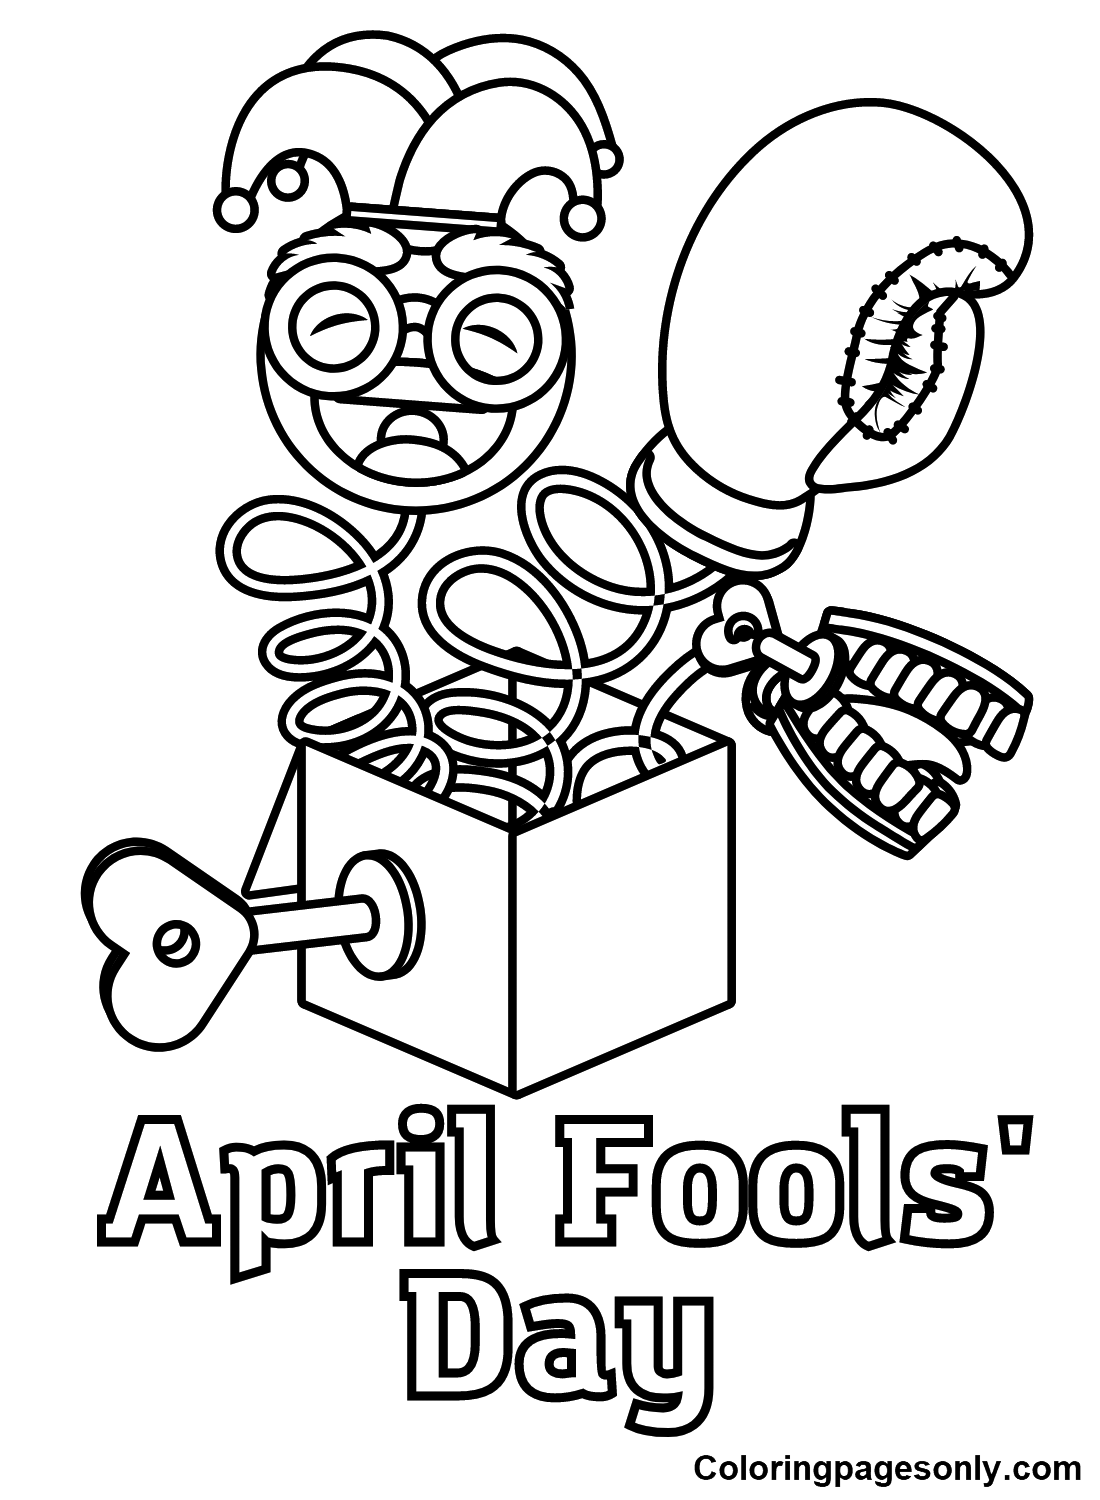 April Fools’ Day Free Coloring Pages